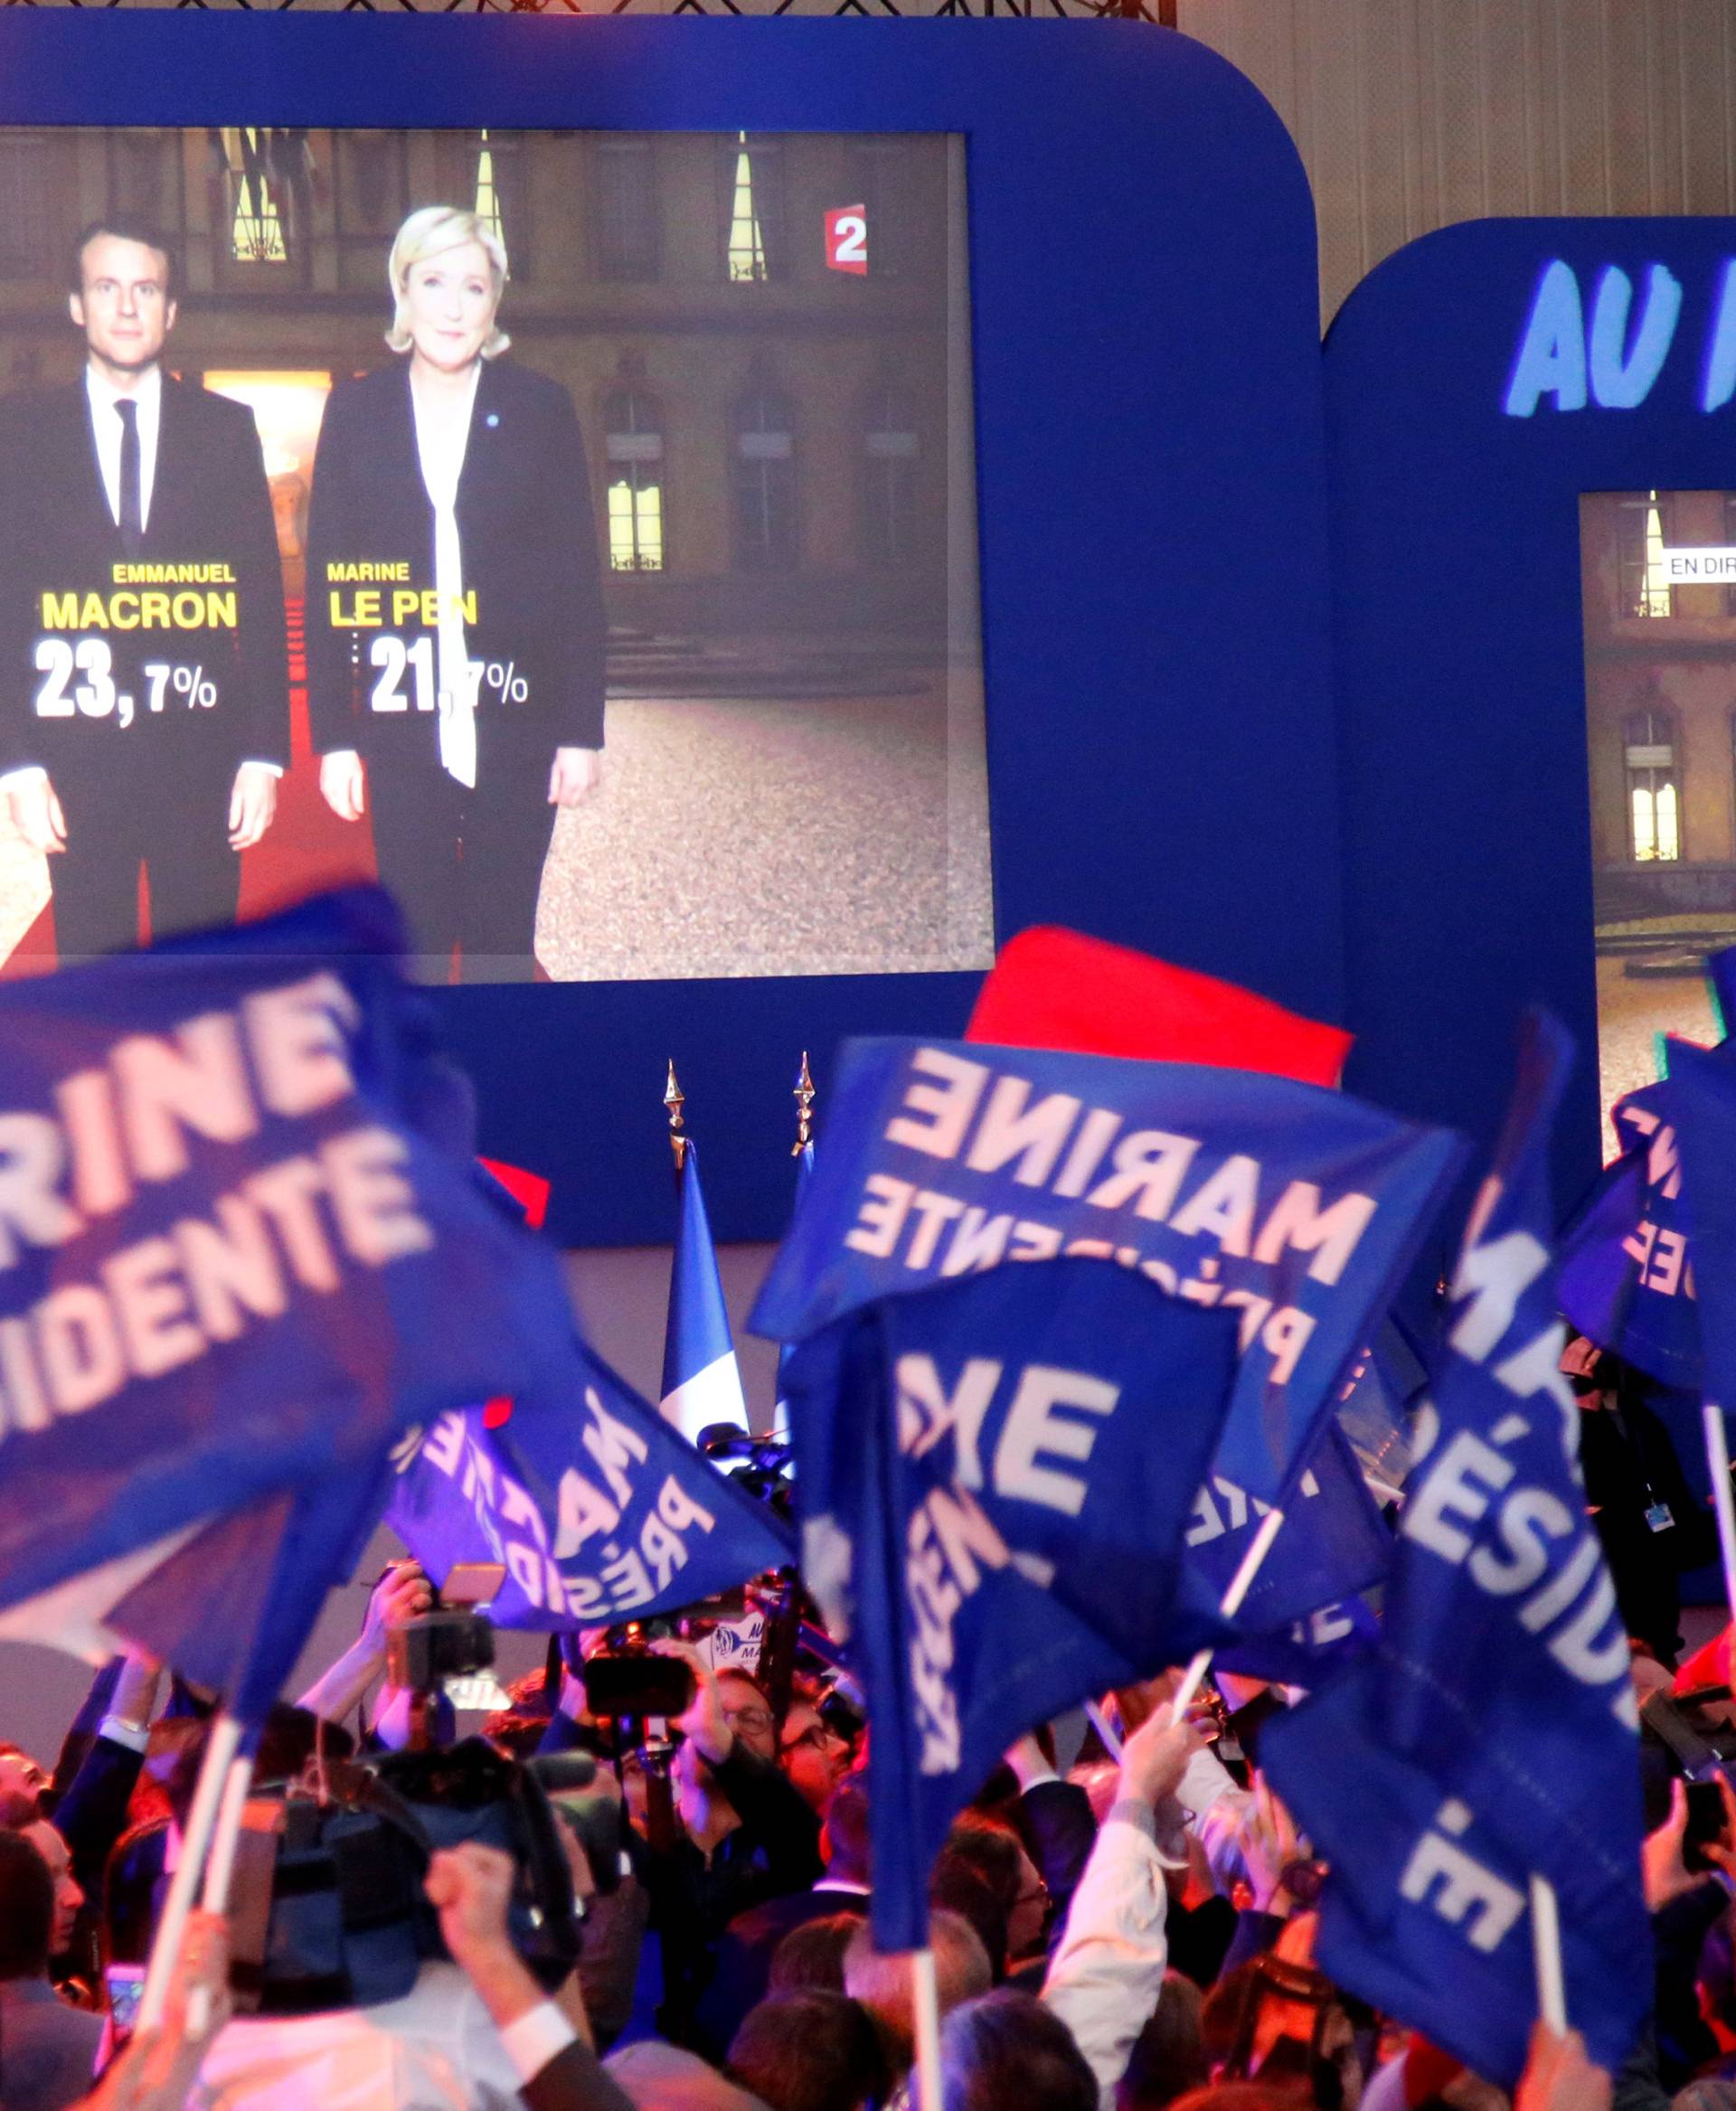 Supporters of Marine Le Pen, French National Front (FN) political party leader and candidate for French 2017 presidential election, react in Henin-Beaumont